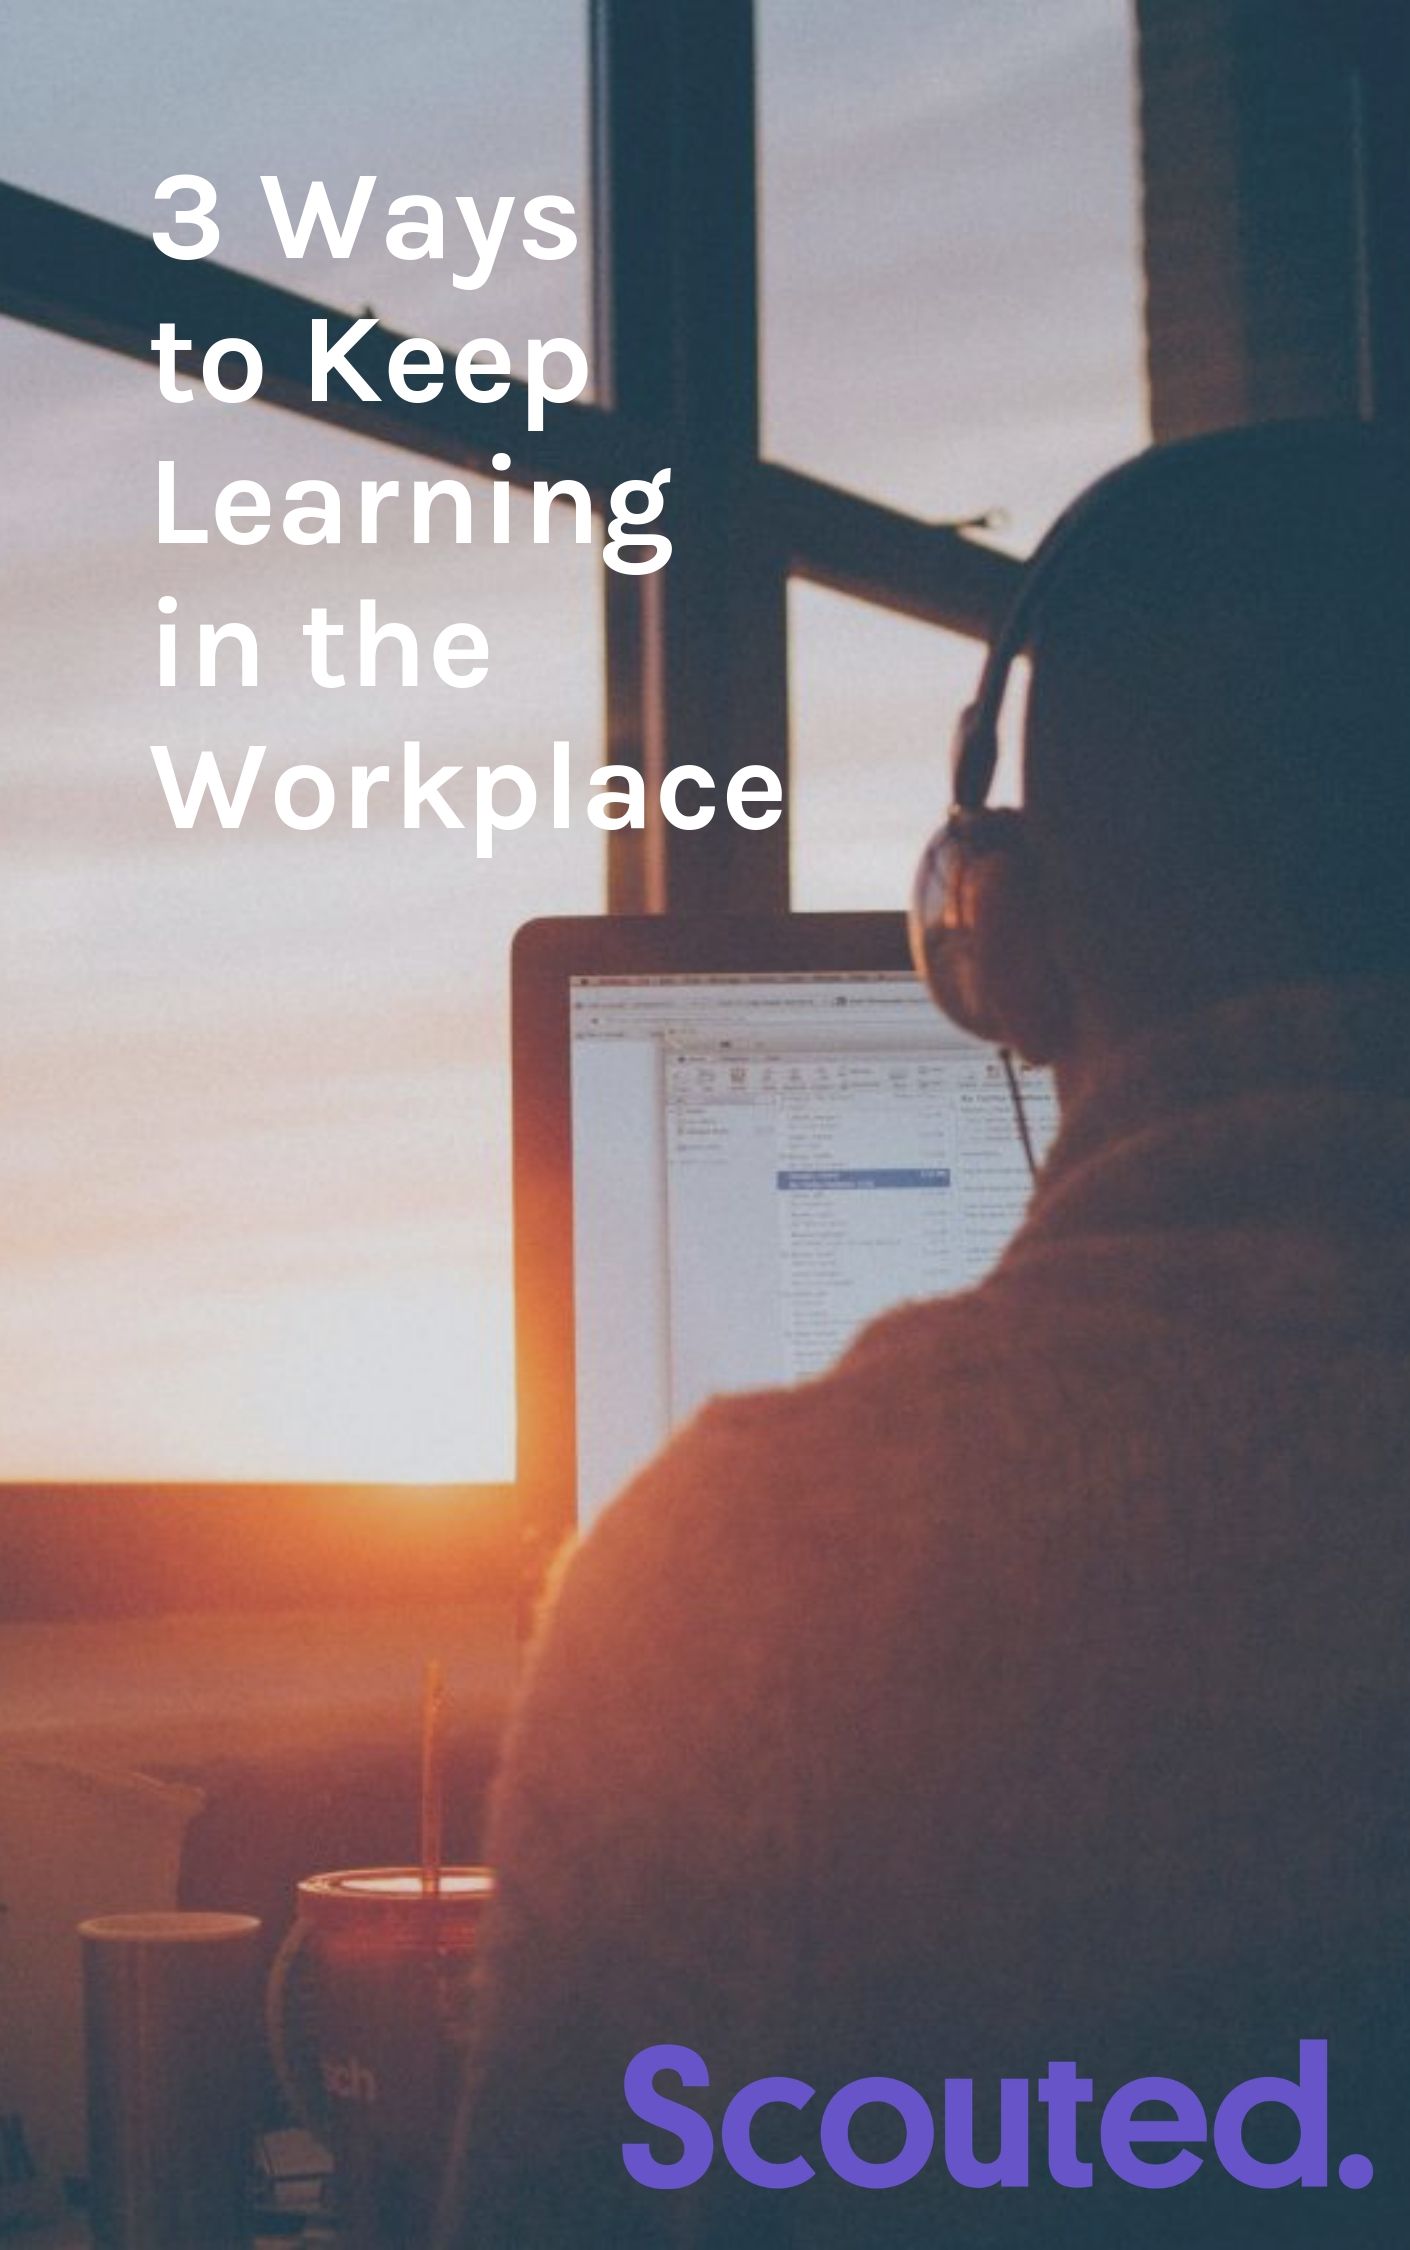 There are plenty of different ways to learn and grow. That being said, in the workplace it can be difficult to expand your horizons with the day to day work. Make sure you carve out a niche of time to grow and prosper. Hopefully, with those three key areas of learning, you can help yourself out even for 30 minutes a day!